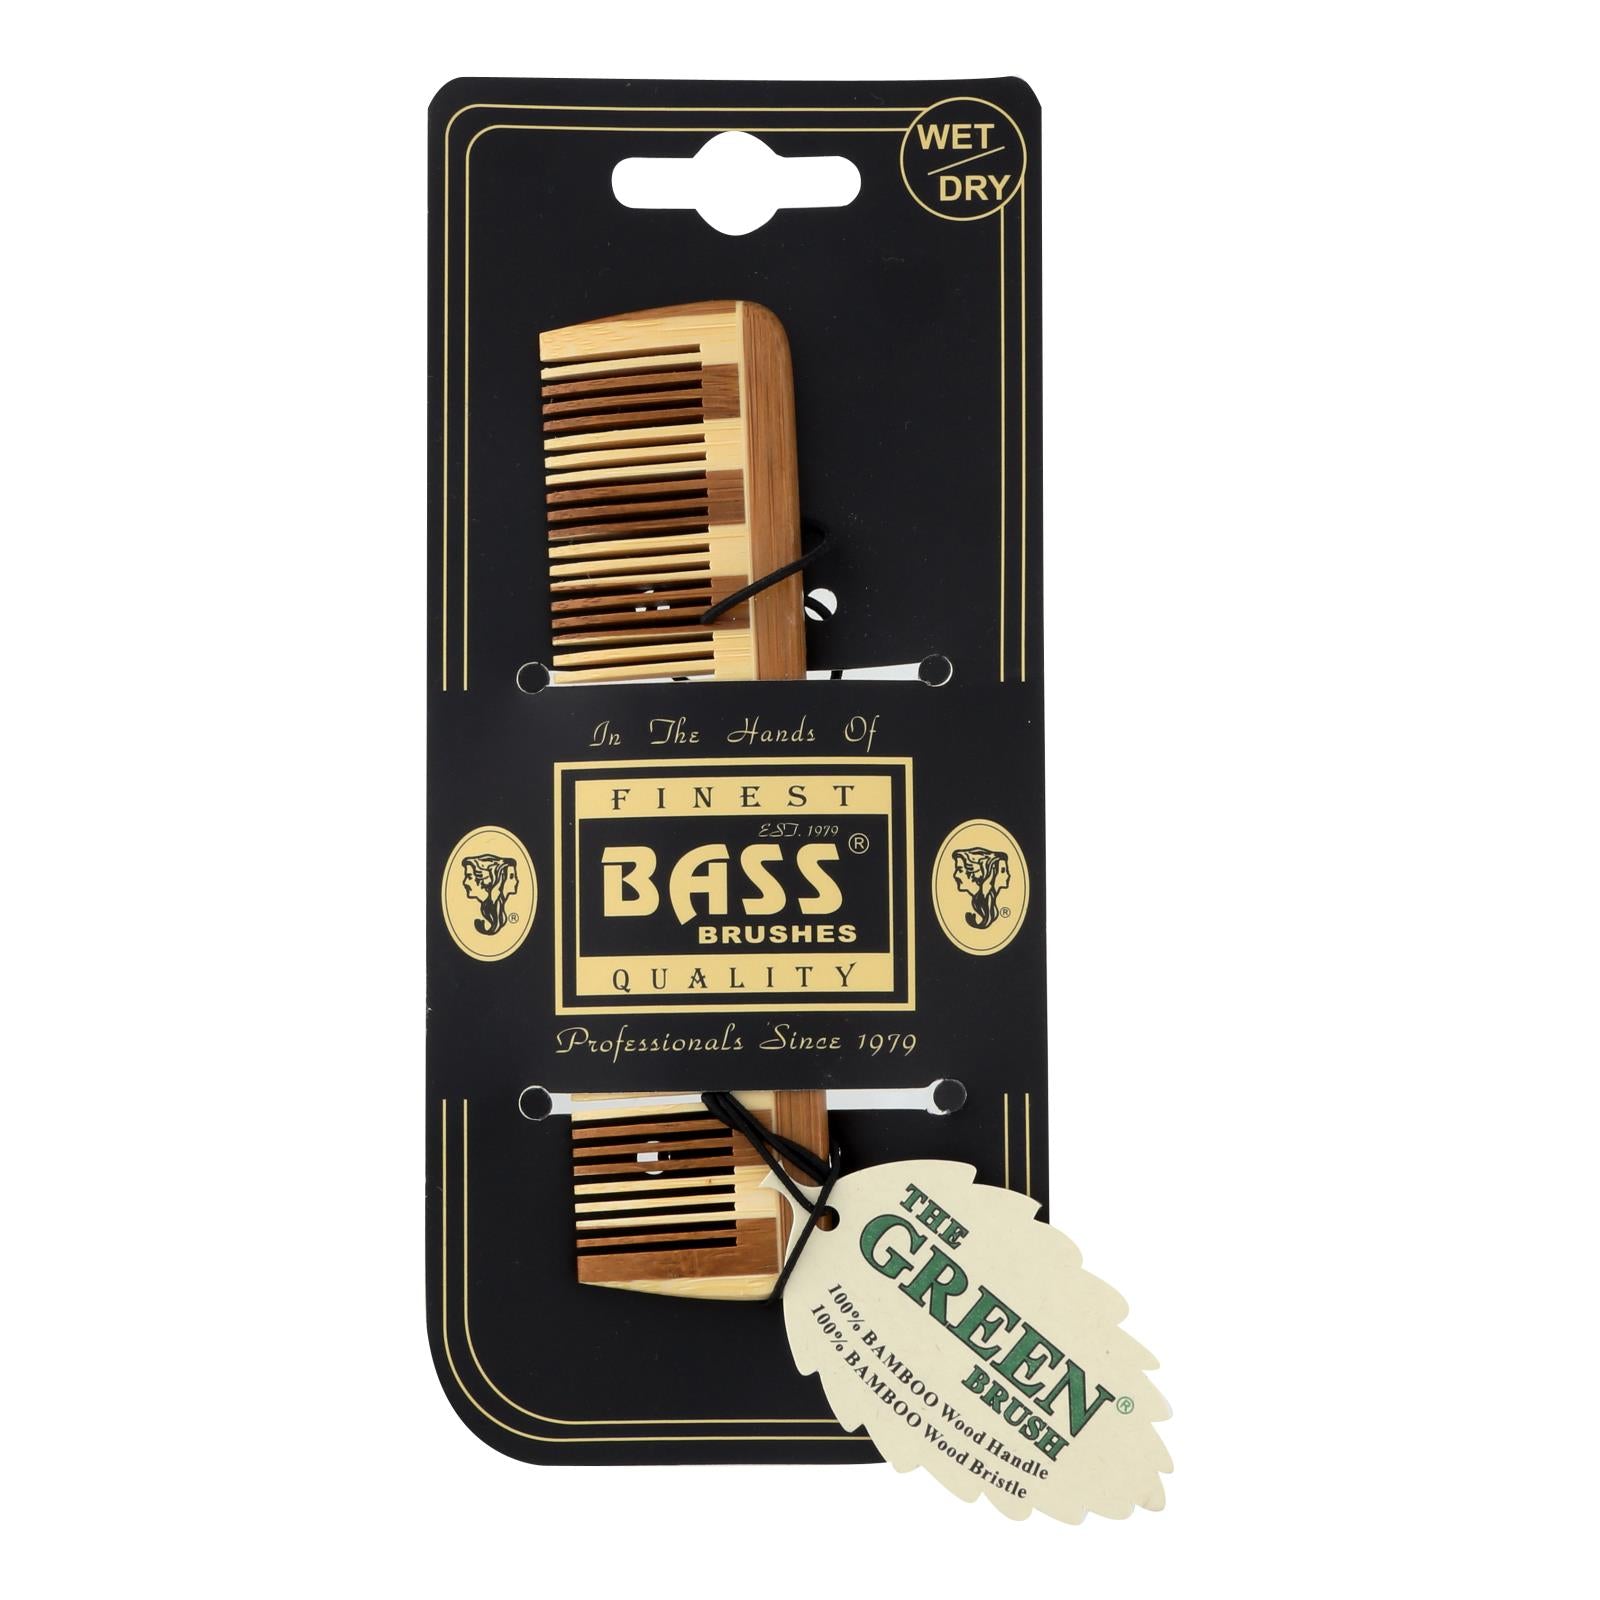 Bass Brushes Wet And Dry Comb  - 1 Each - Ct